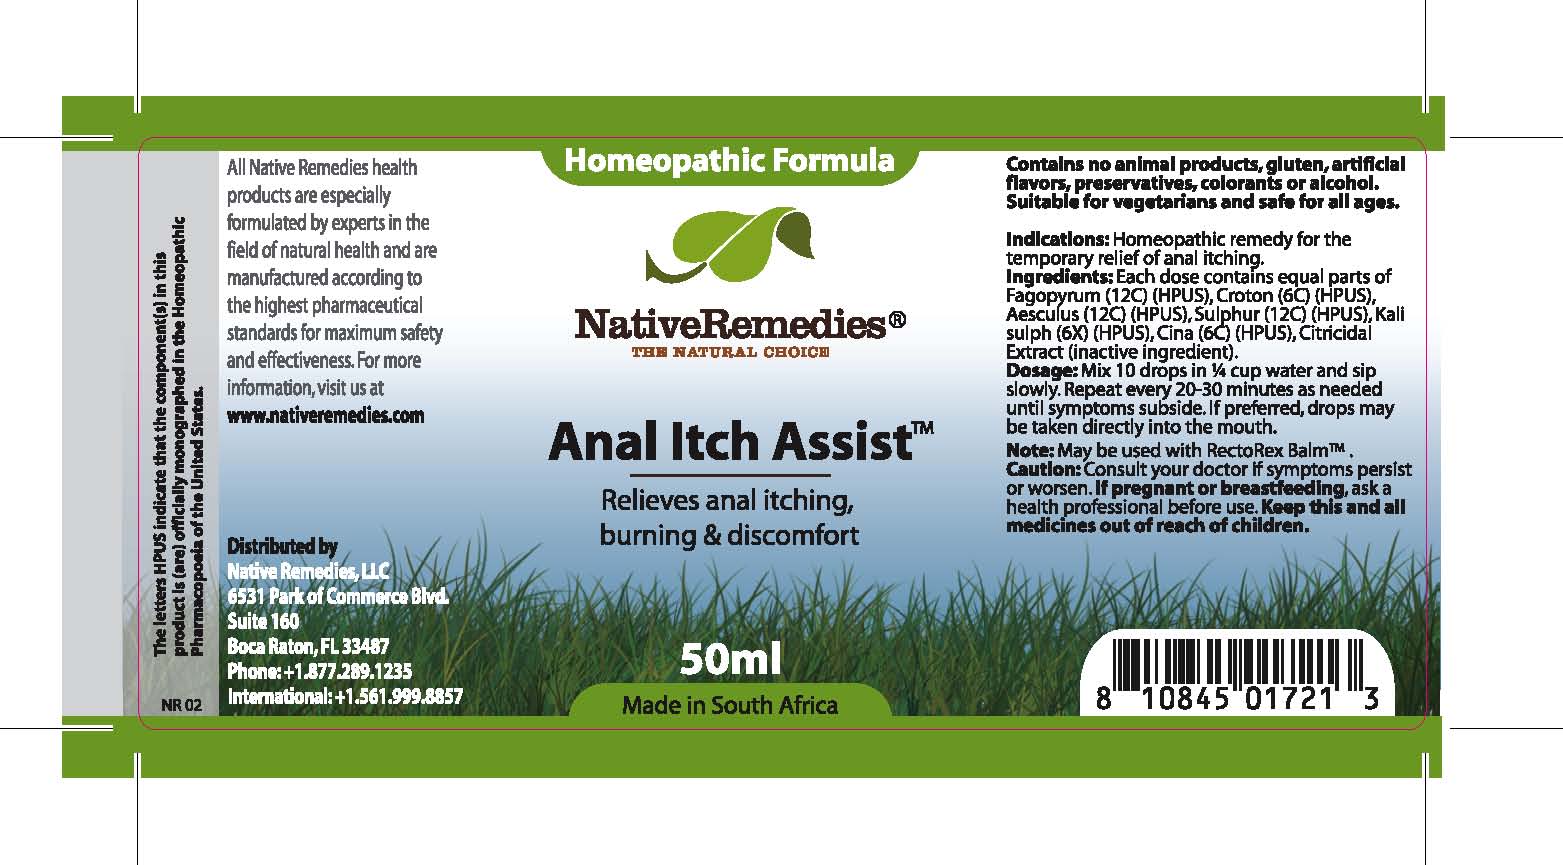 Anal Itch Assist